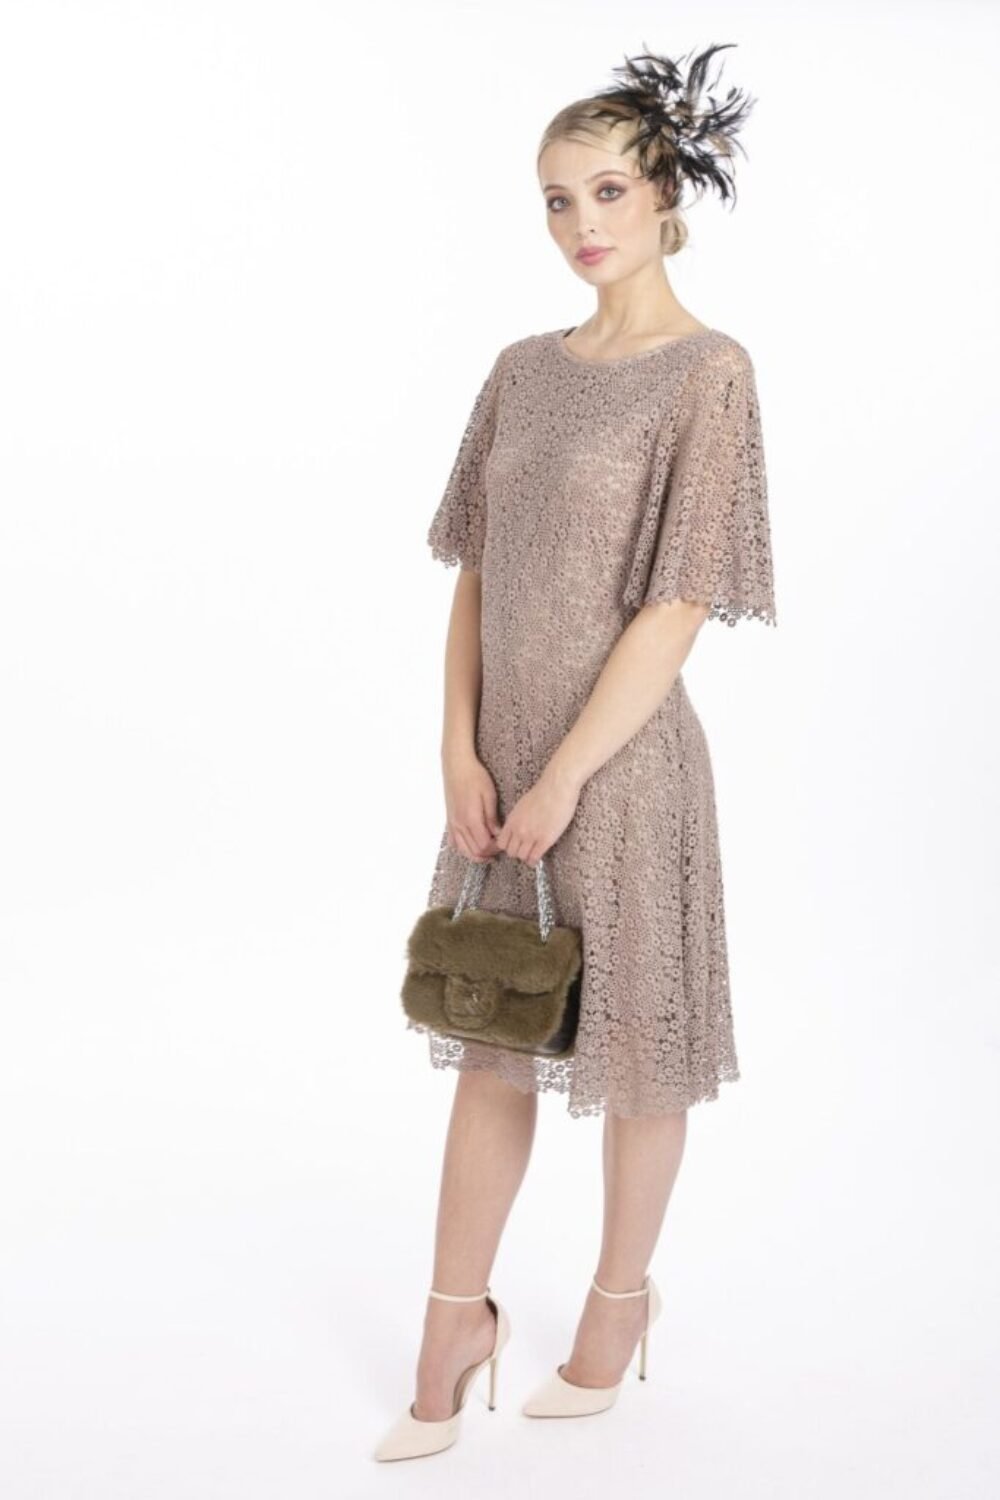 Shop Lux Mocha Vintage Lace Dress and women's luxury and designer clothes at www.lux-apparel.co.uk